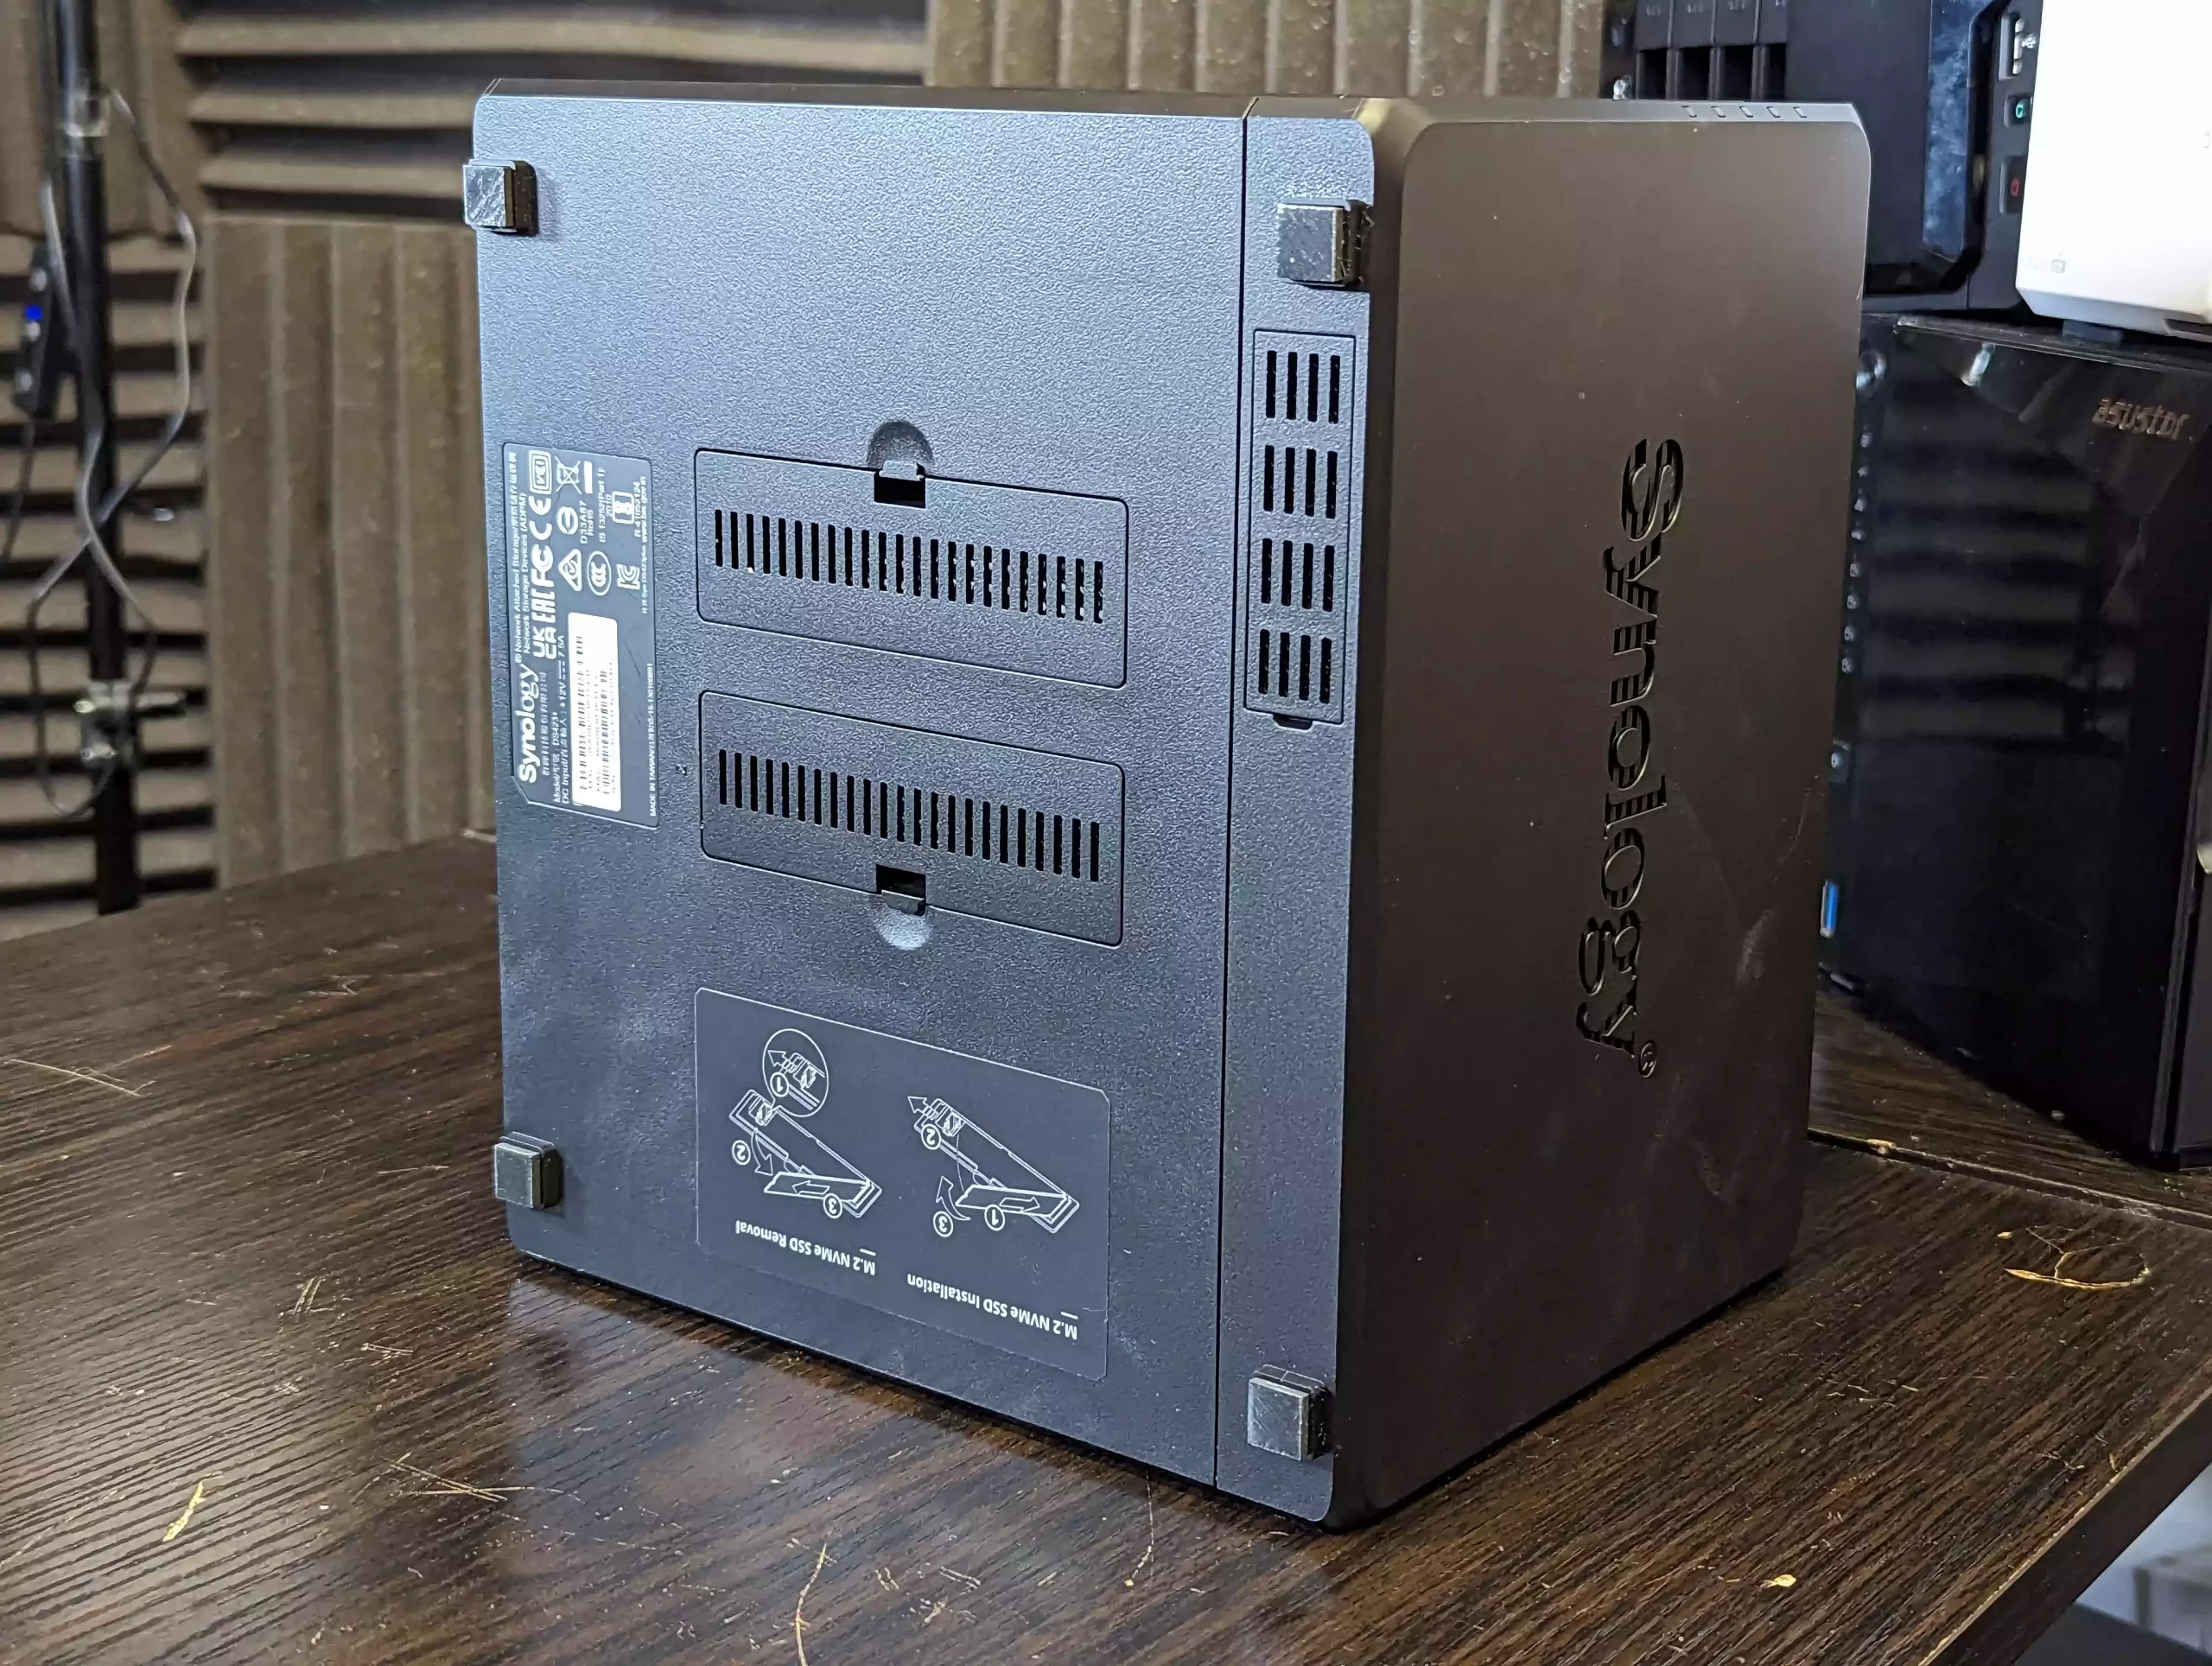 Synology Launches DiskStation DS423+ and DS423 For Home and Small Business